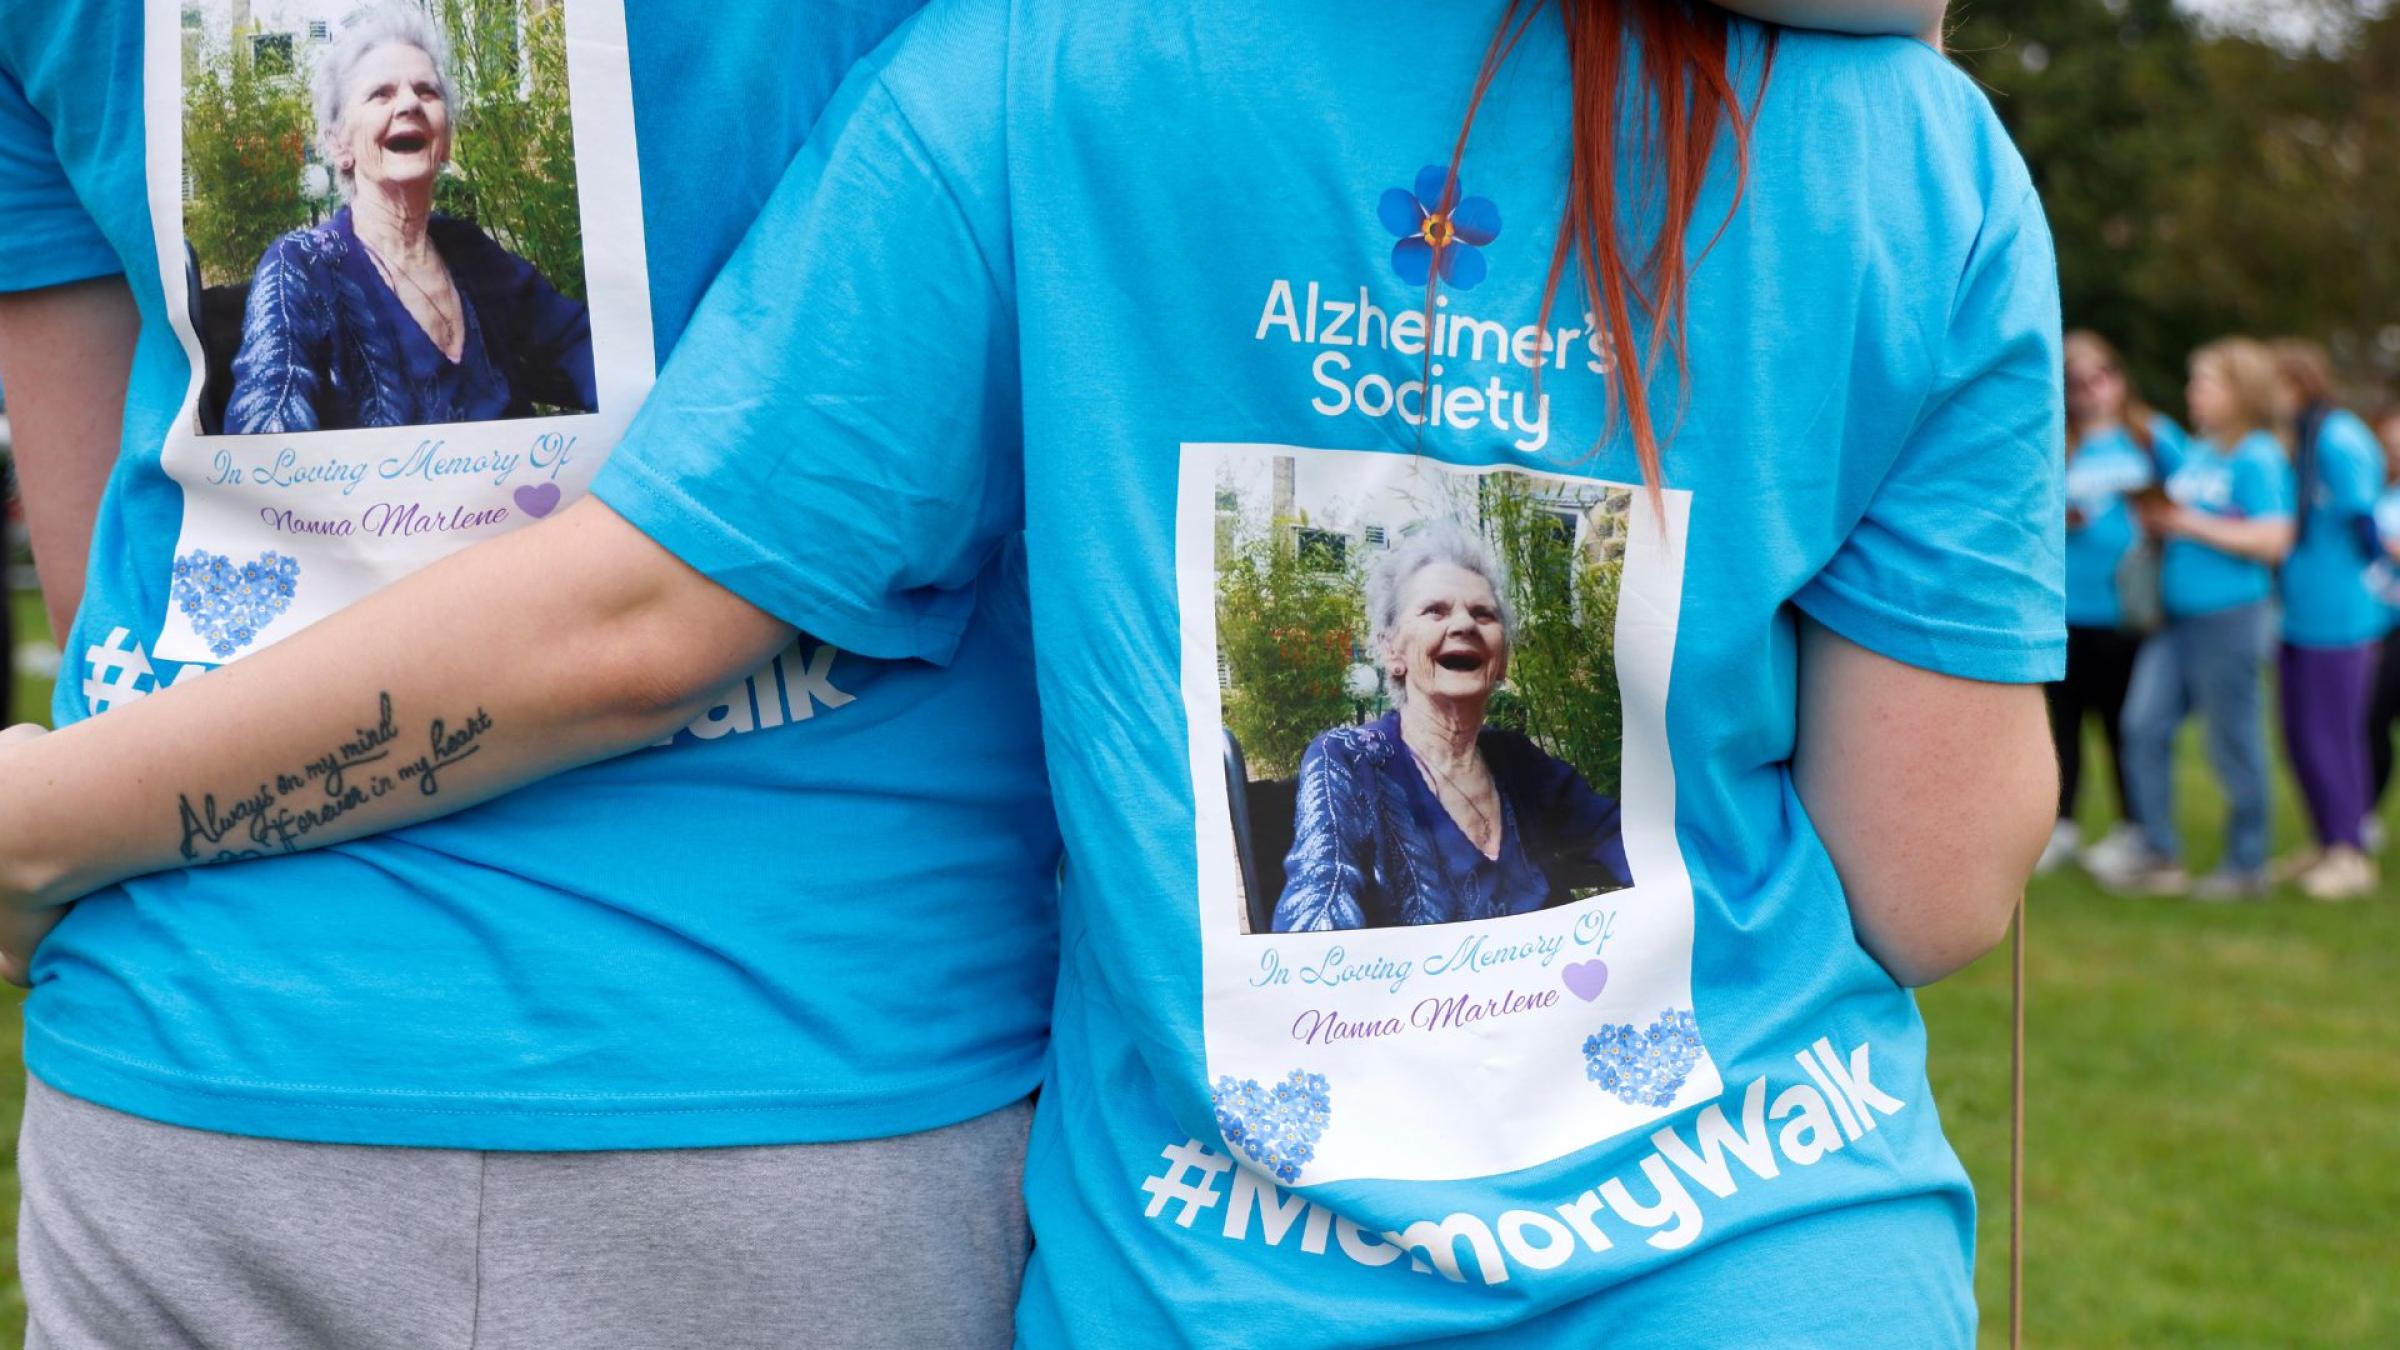 2 people arm in arm with their backs to the camera, wearing blue Memory Walk t-shirts with images of a loved one on the back.